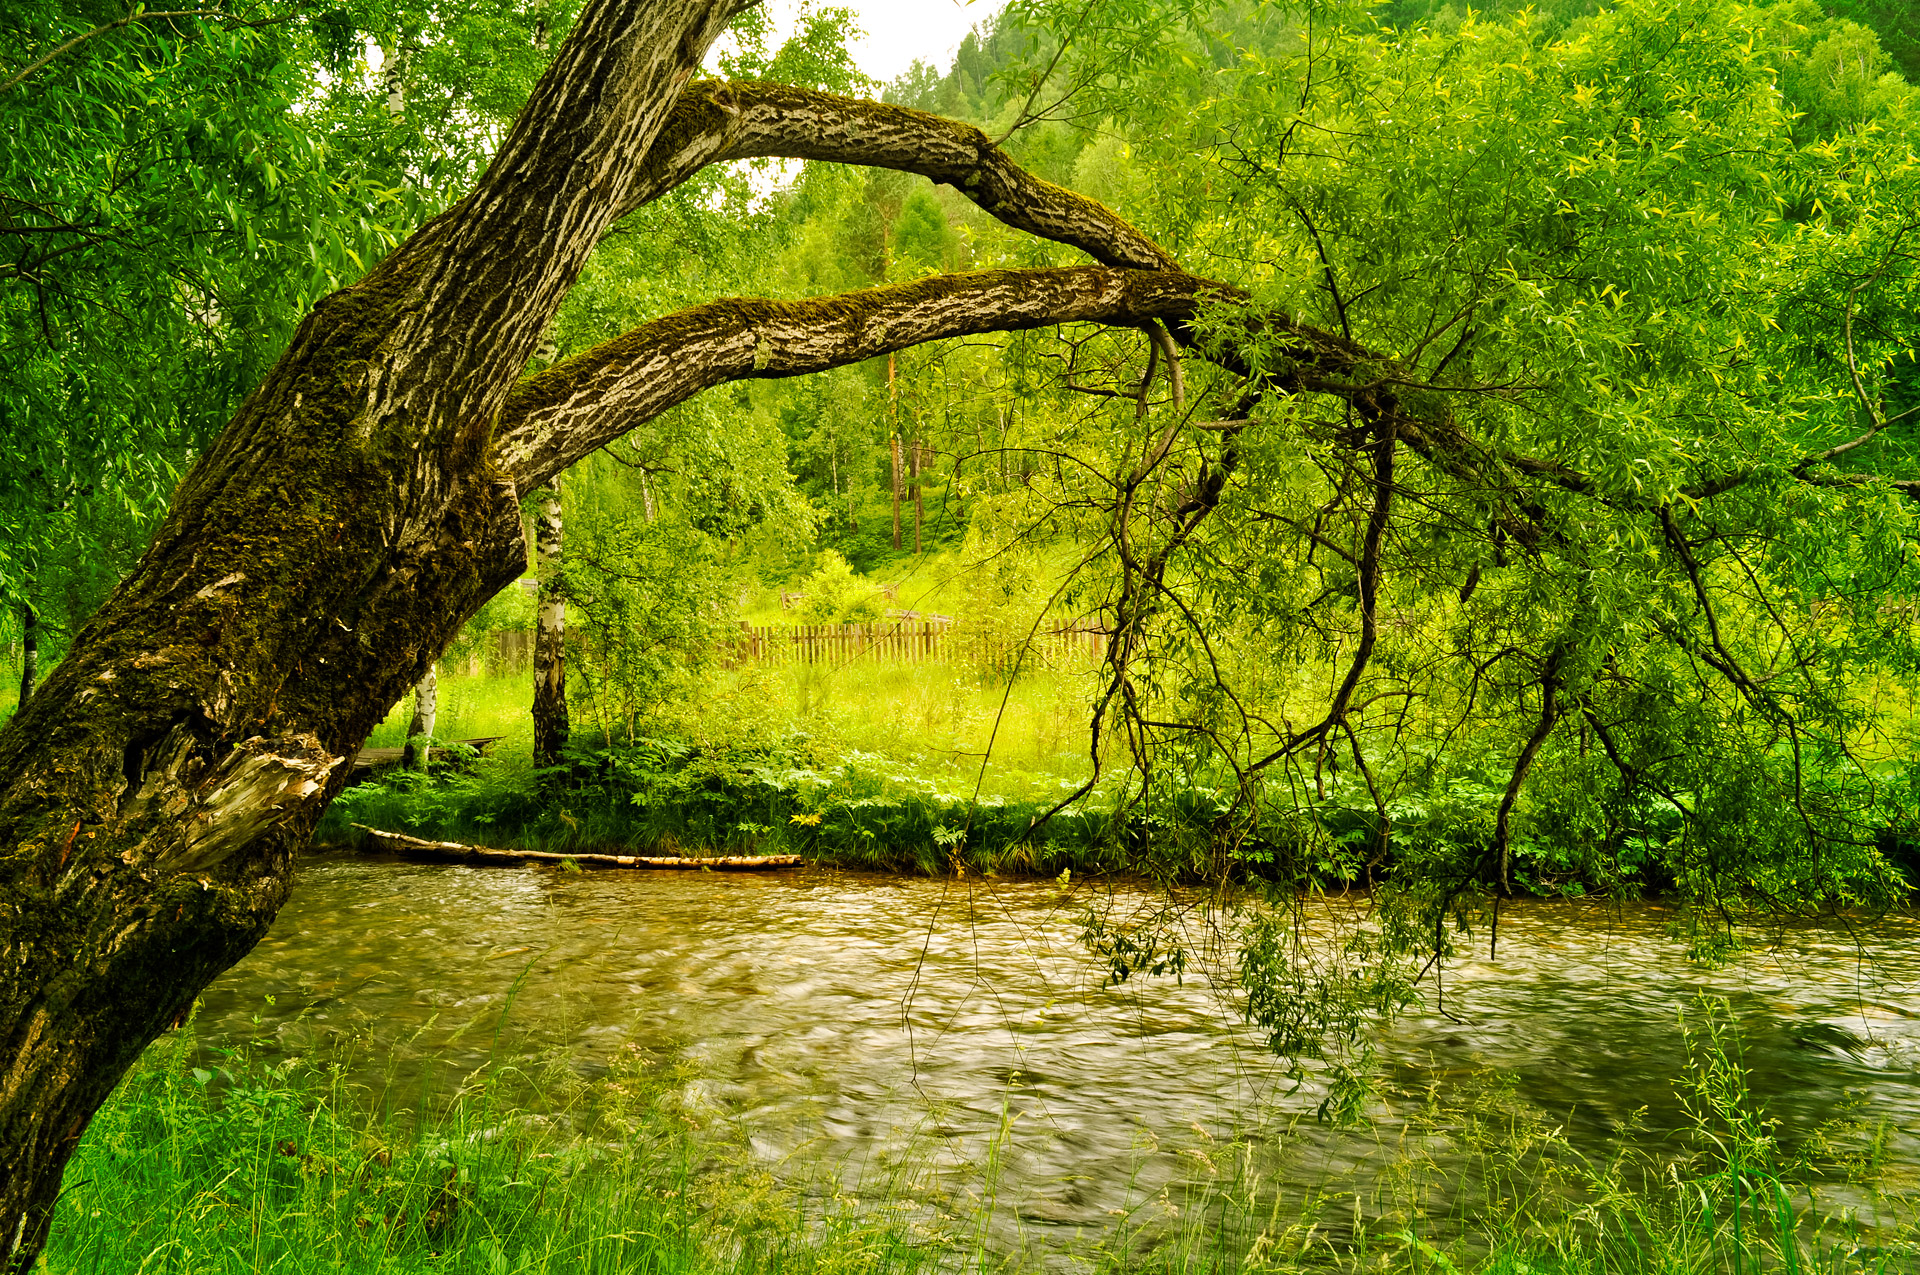 tree-branch-river-water-reflection-free-image-from-needpix